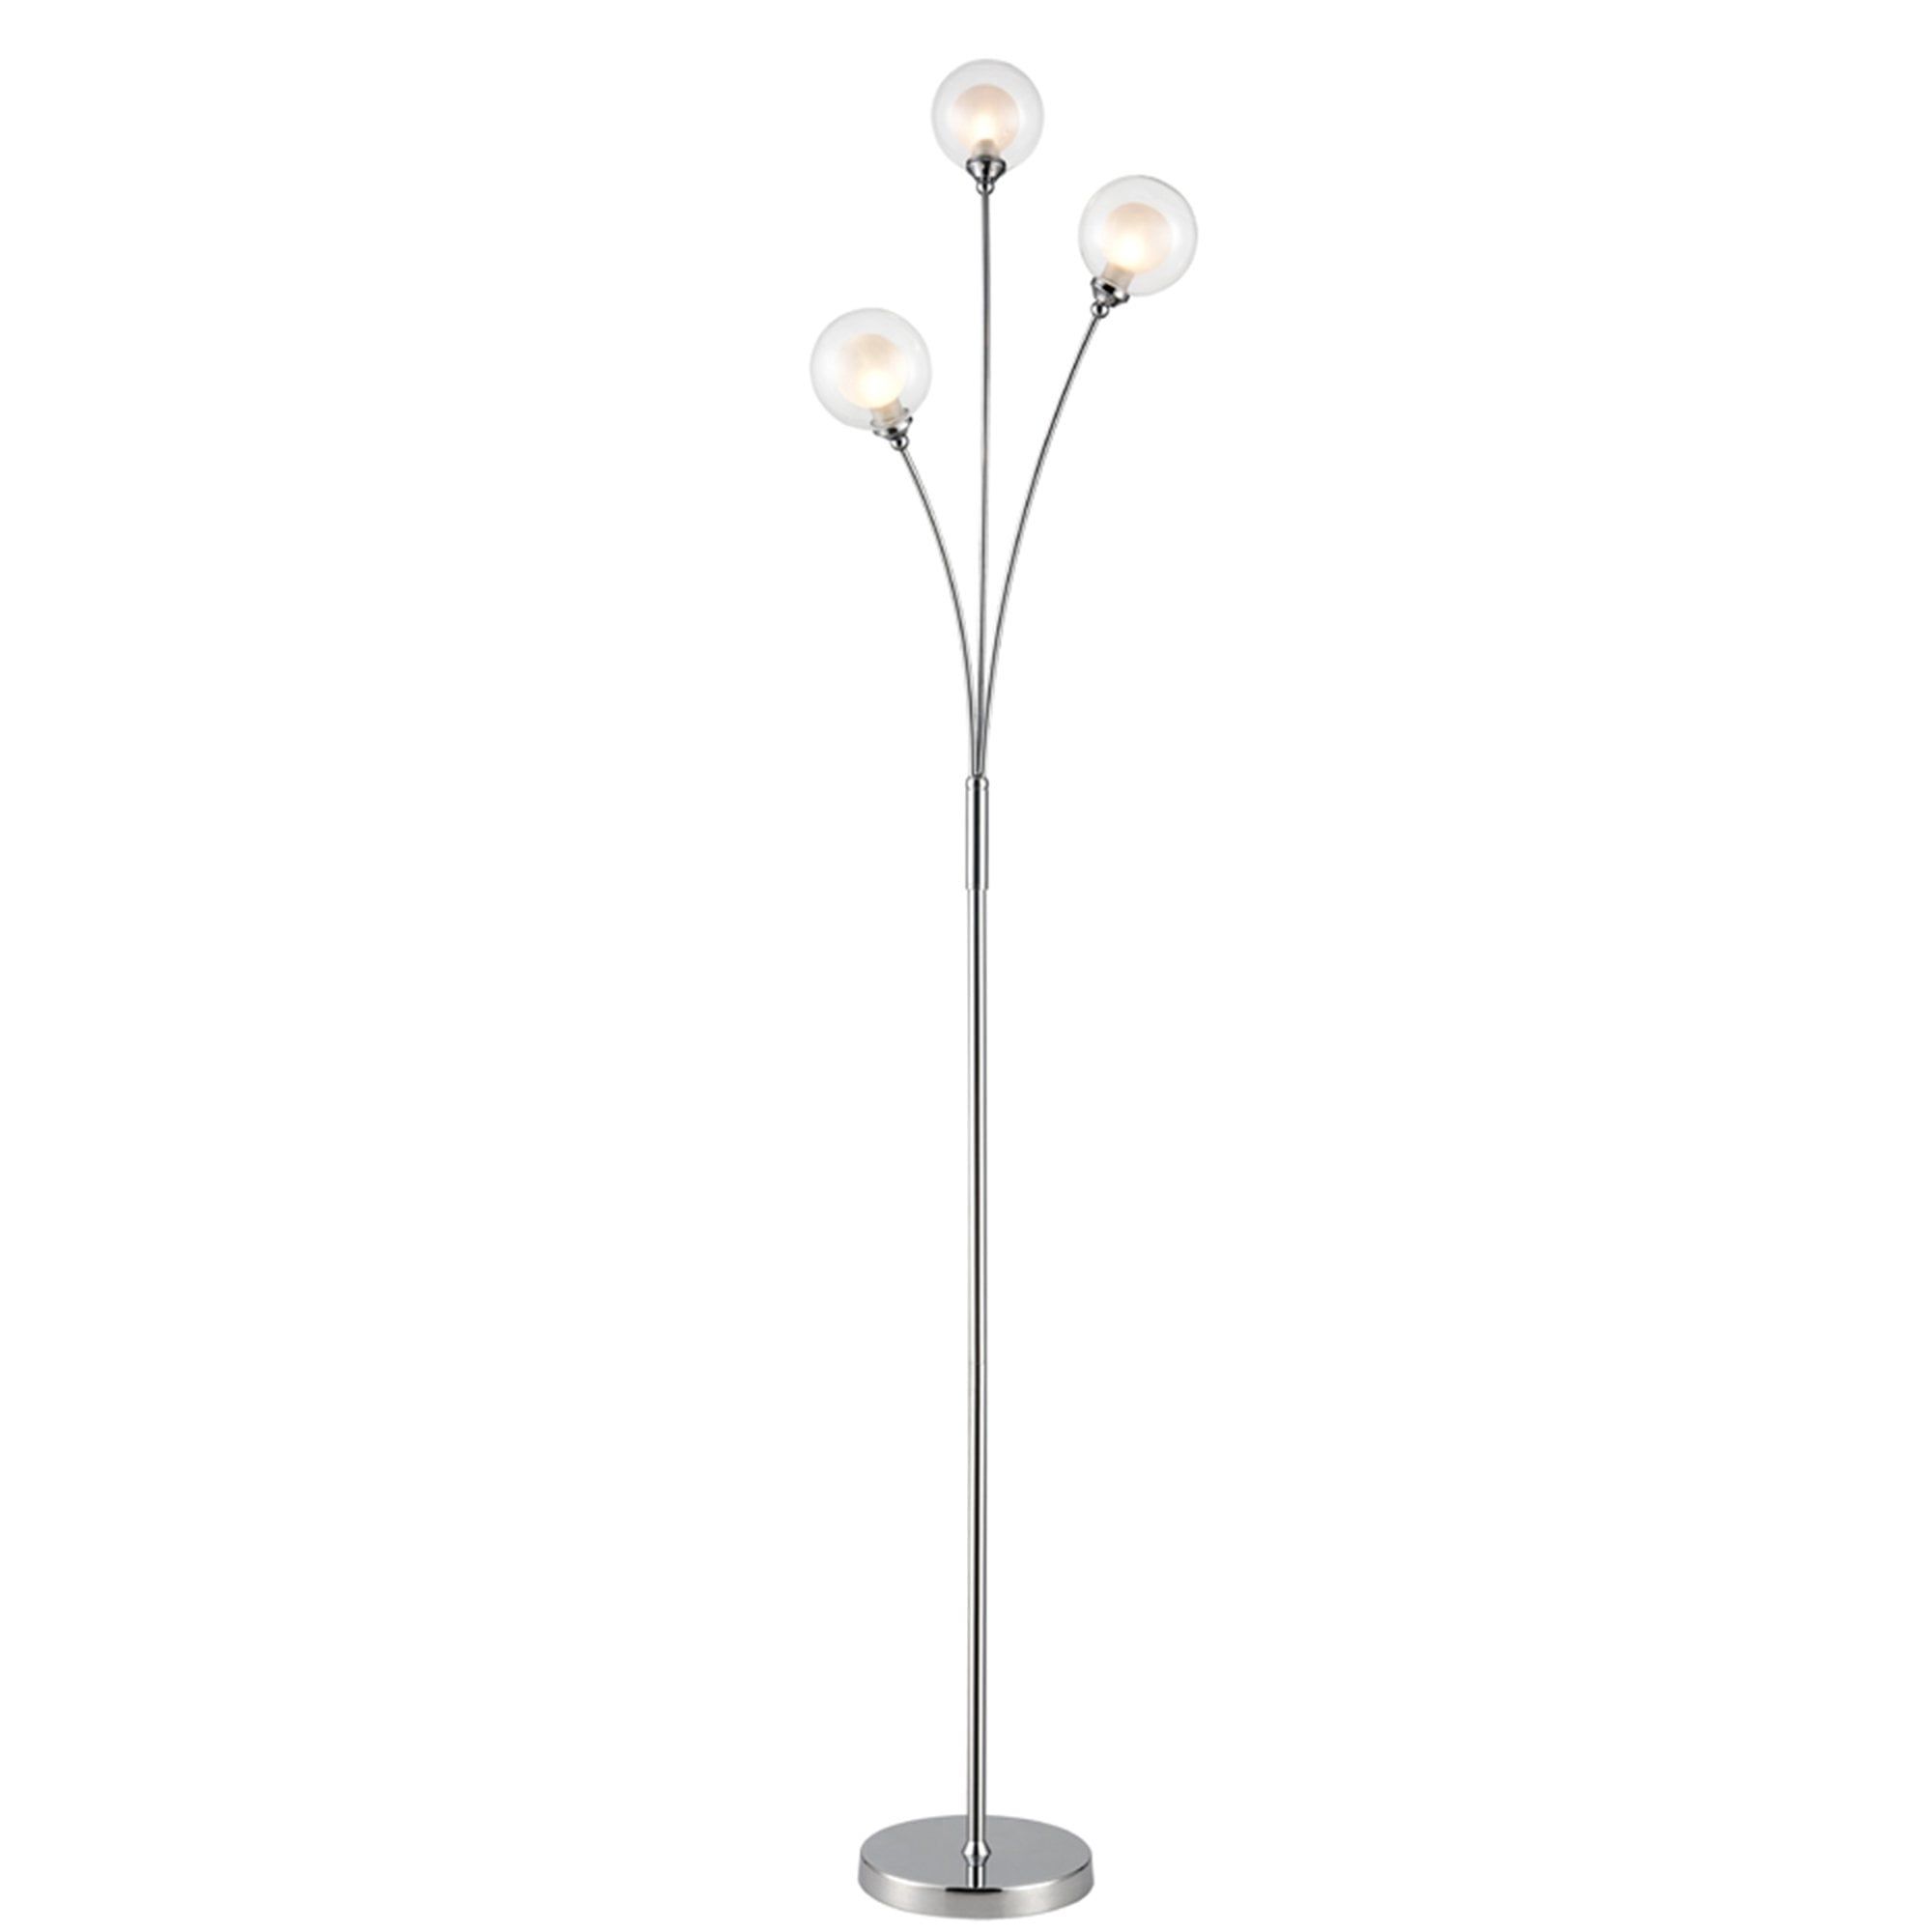 Gorgeous 3 Light Floor Lamp With Clear Glass Spheres – Floor Lamp From  Envogue Lighting Uk Inside 3 Light Floor Lamps (View 16 of 20)